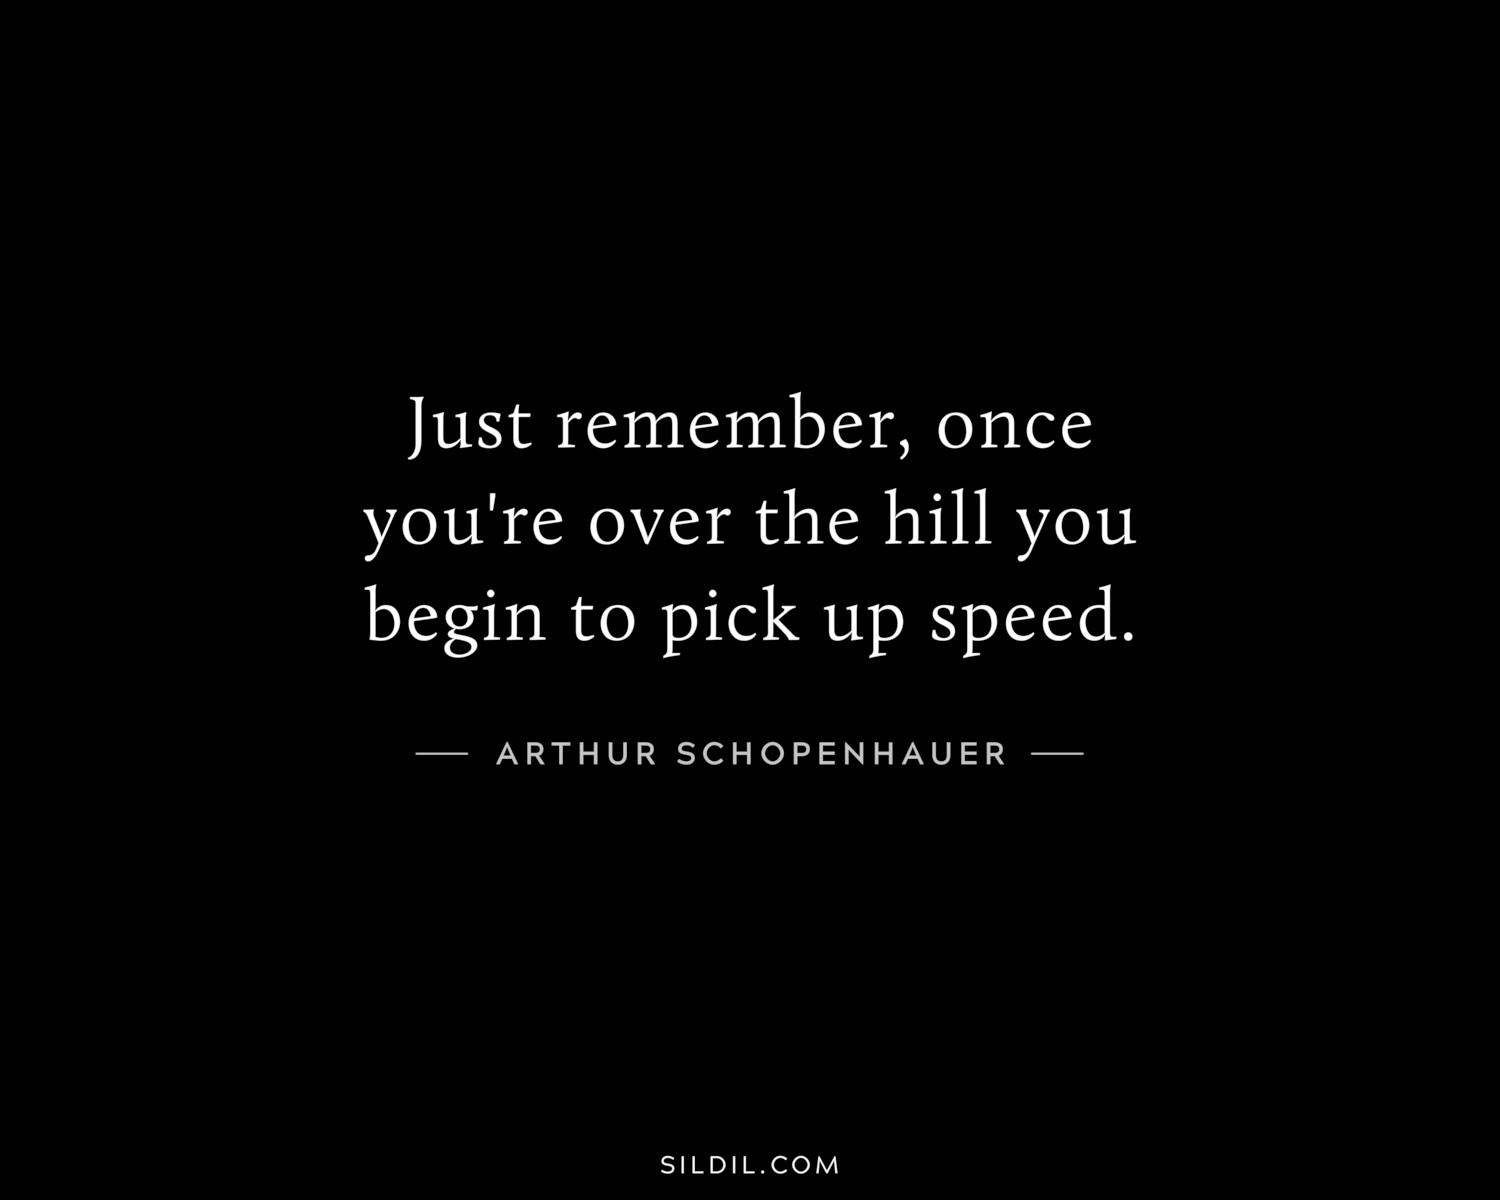 Just remember, once you're over the hill you begin to pick up speed.